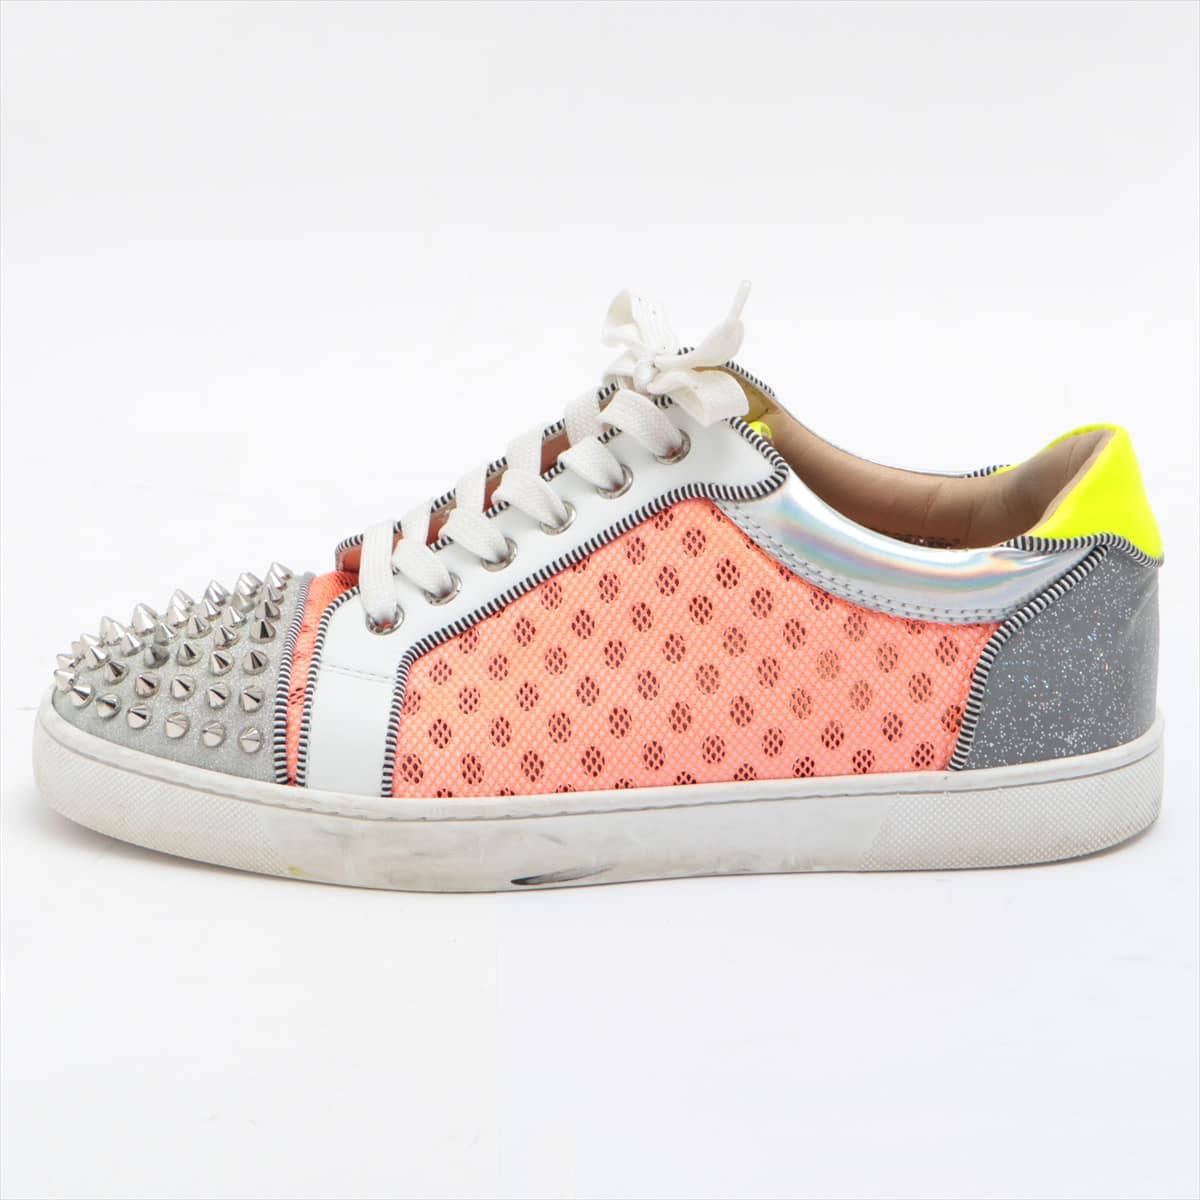 Christian Louboutin Louis Jr. Leather x fabric Sneakers 40.5 Men's Orange There are cigarette extinguishing marks